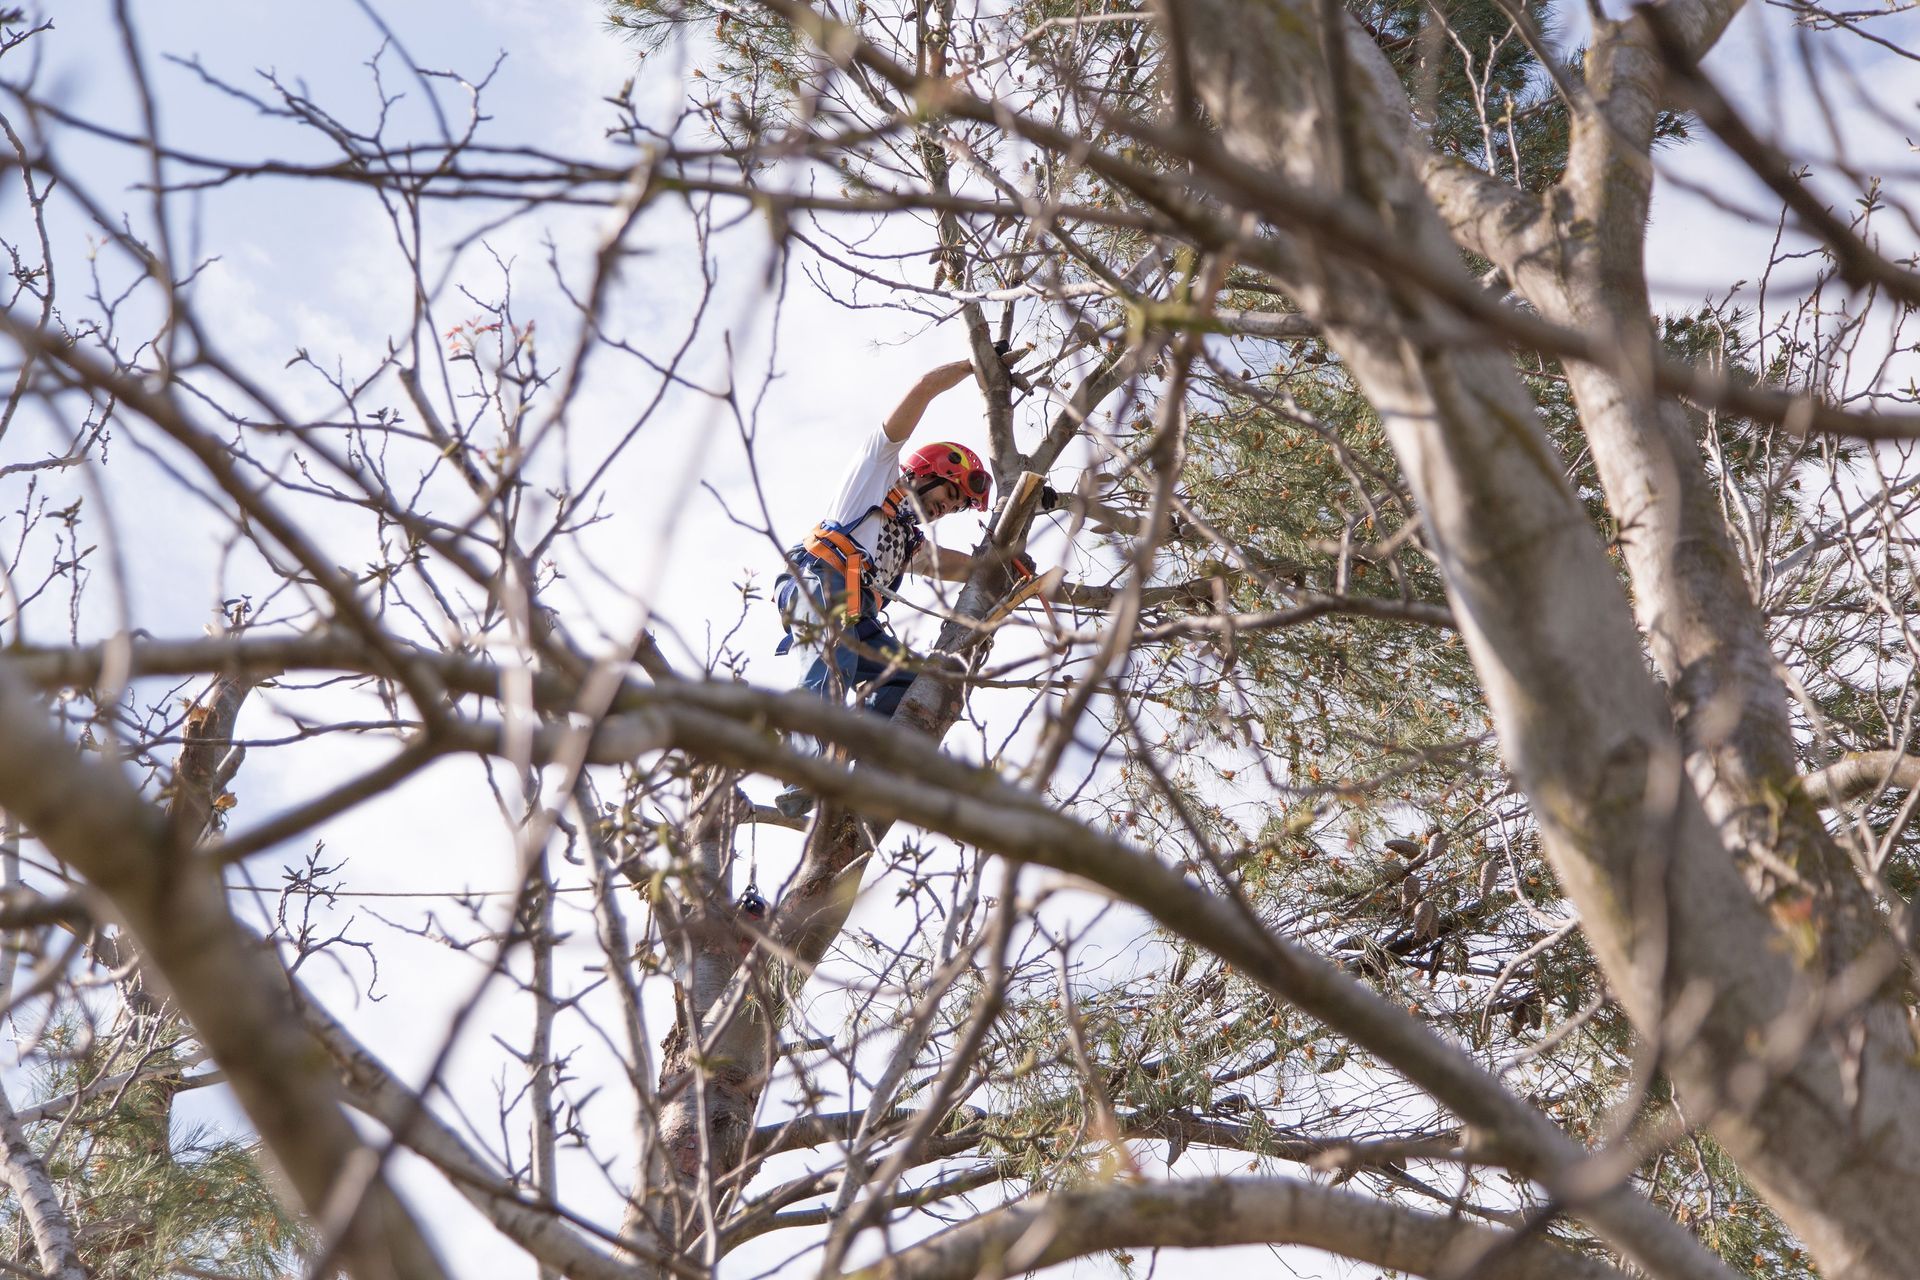 arborist high in the tree trimming branches